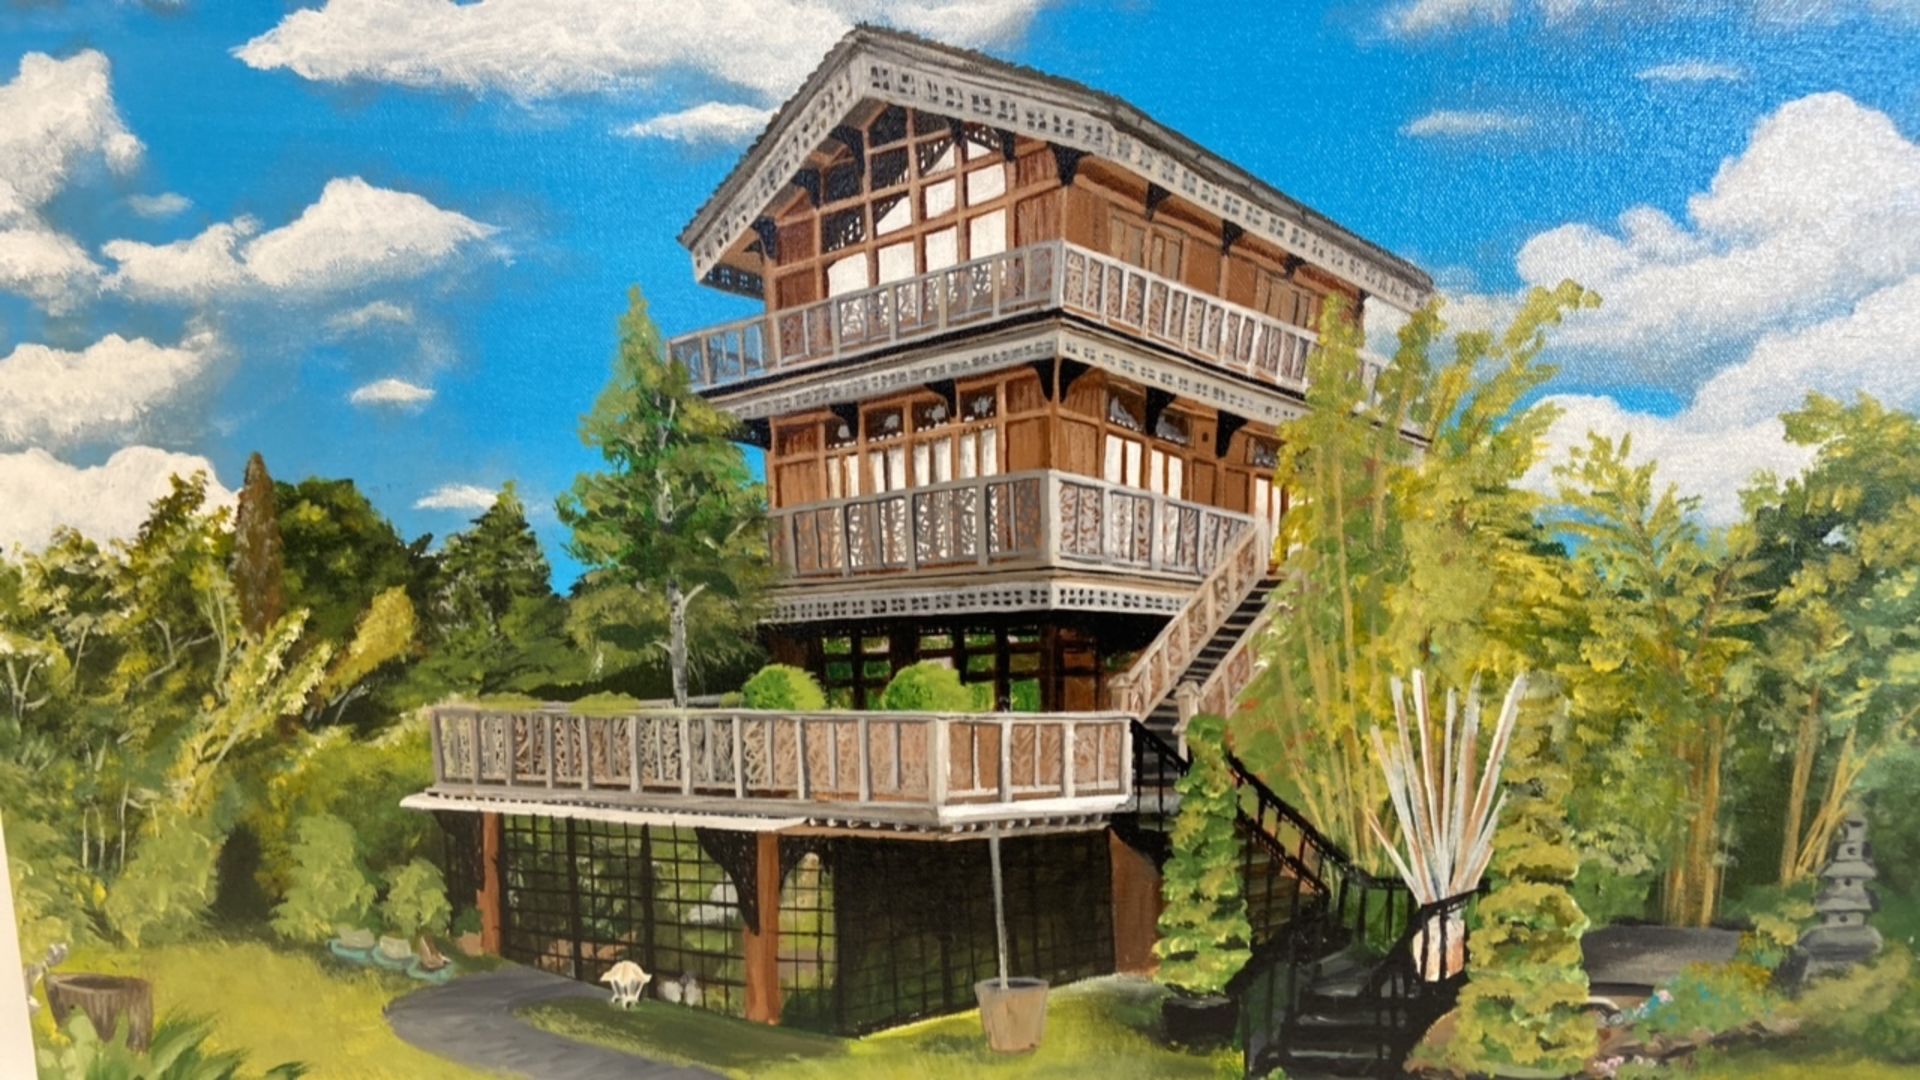 Bespoke Swiss Chalet Painting - Image 2 of 4